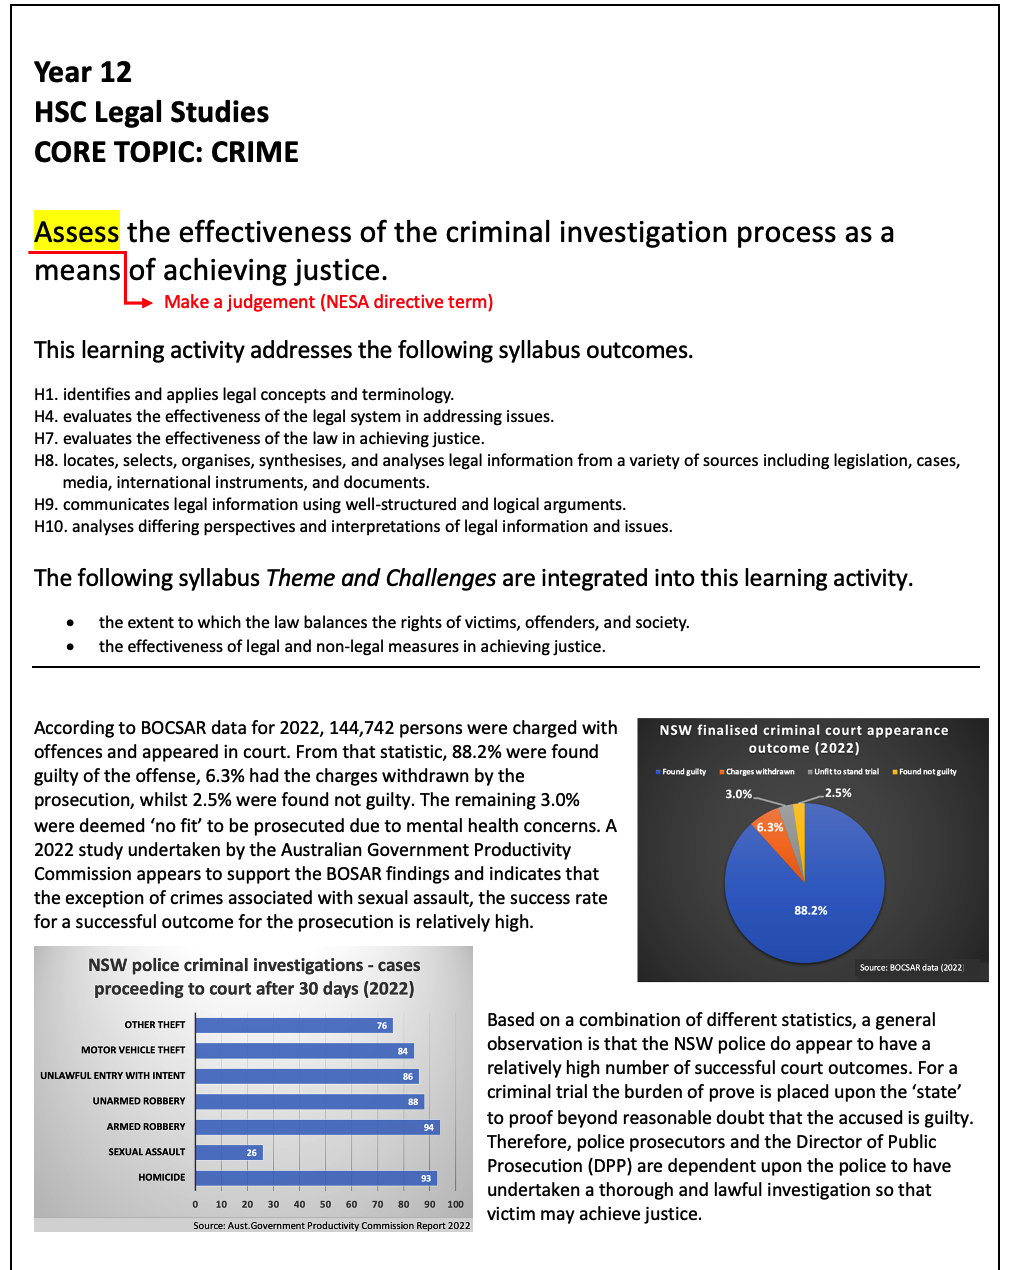 Assess The Effectiveness Of The Incriminal Investigation Process